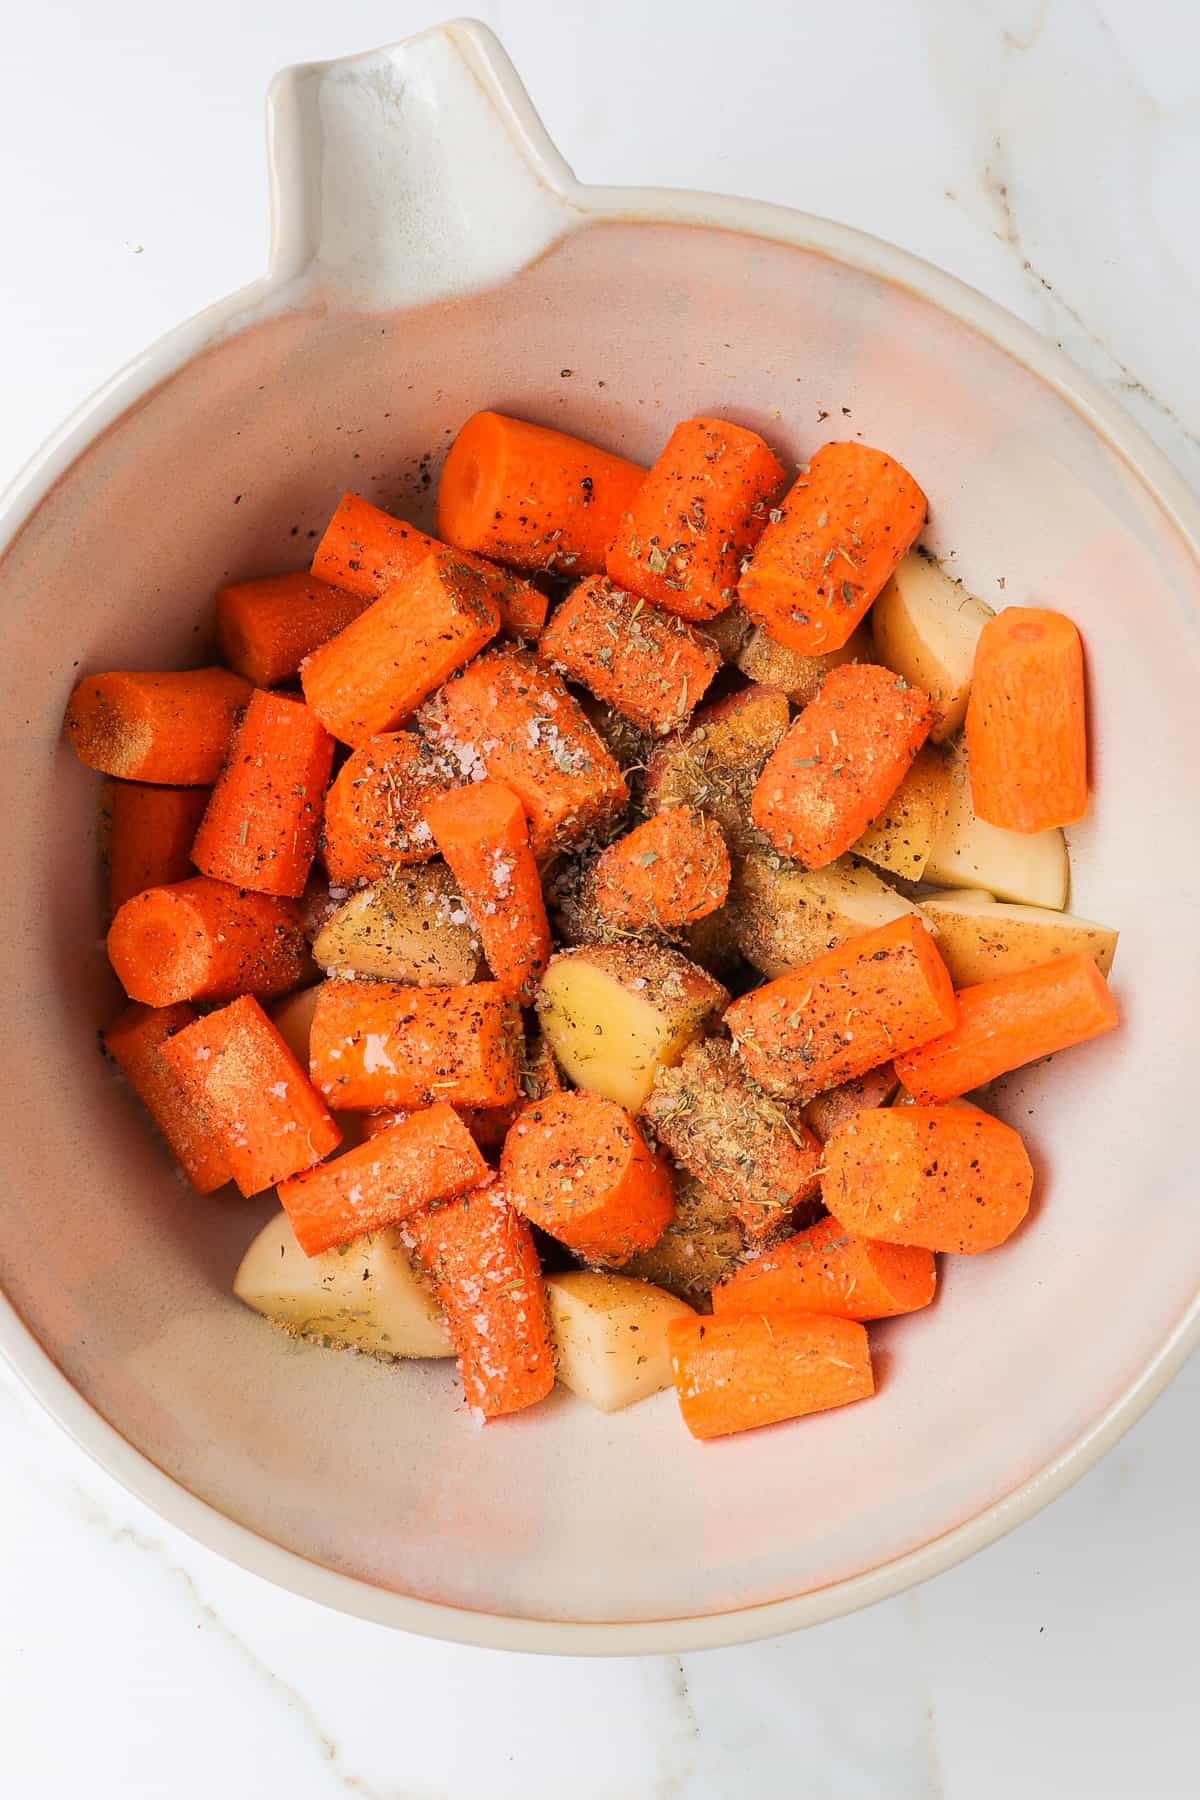 Carrots and potatoes in a bowl with seasonings.